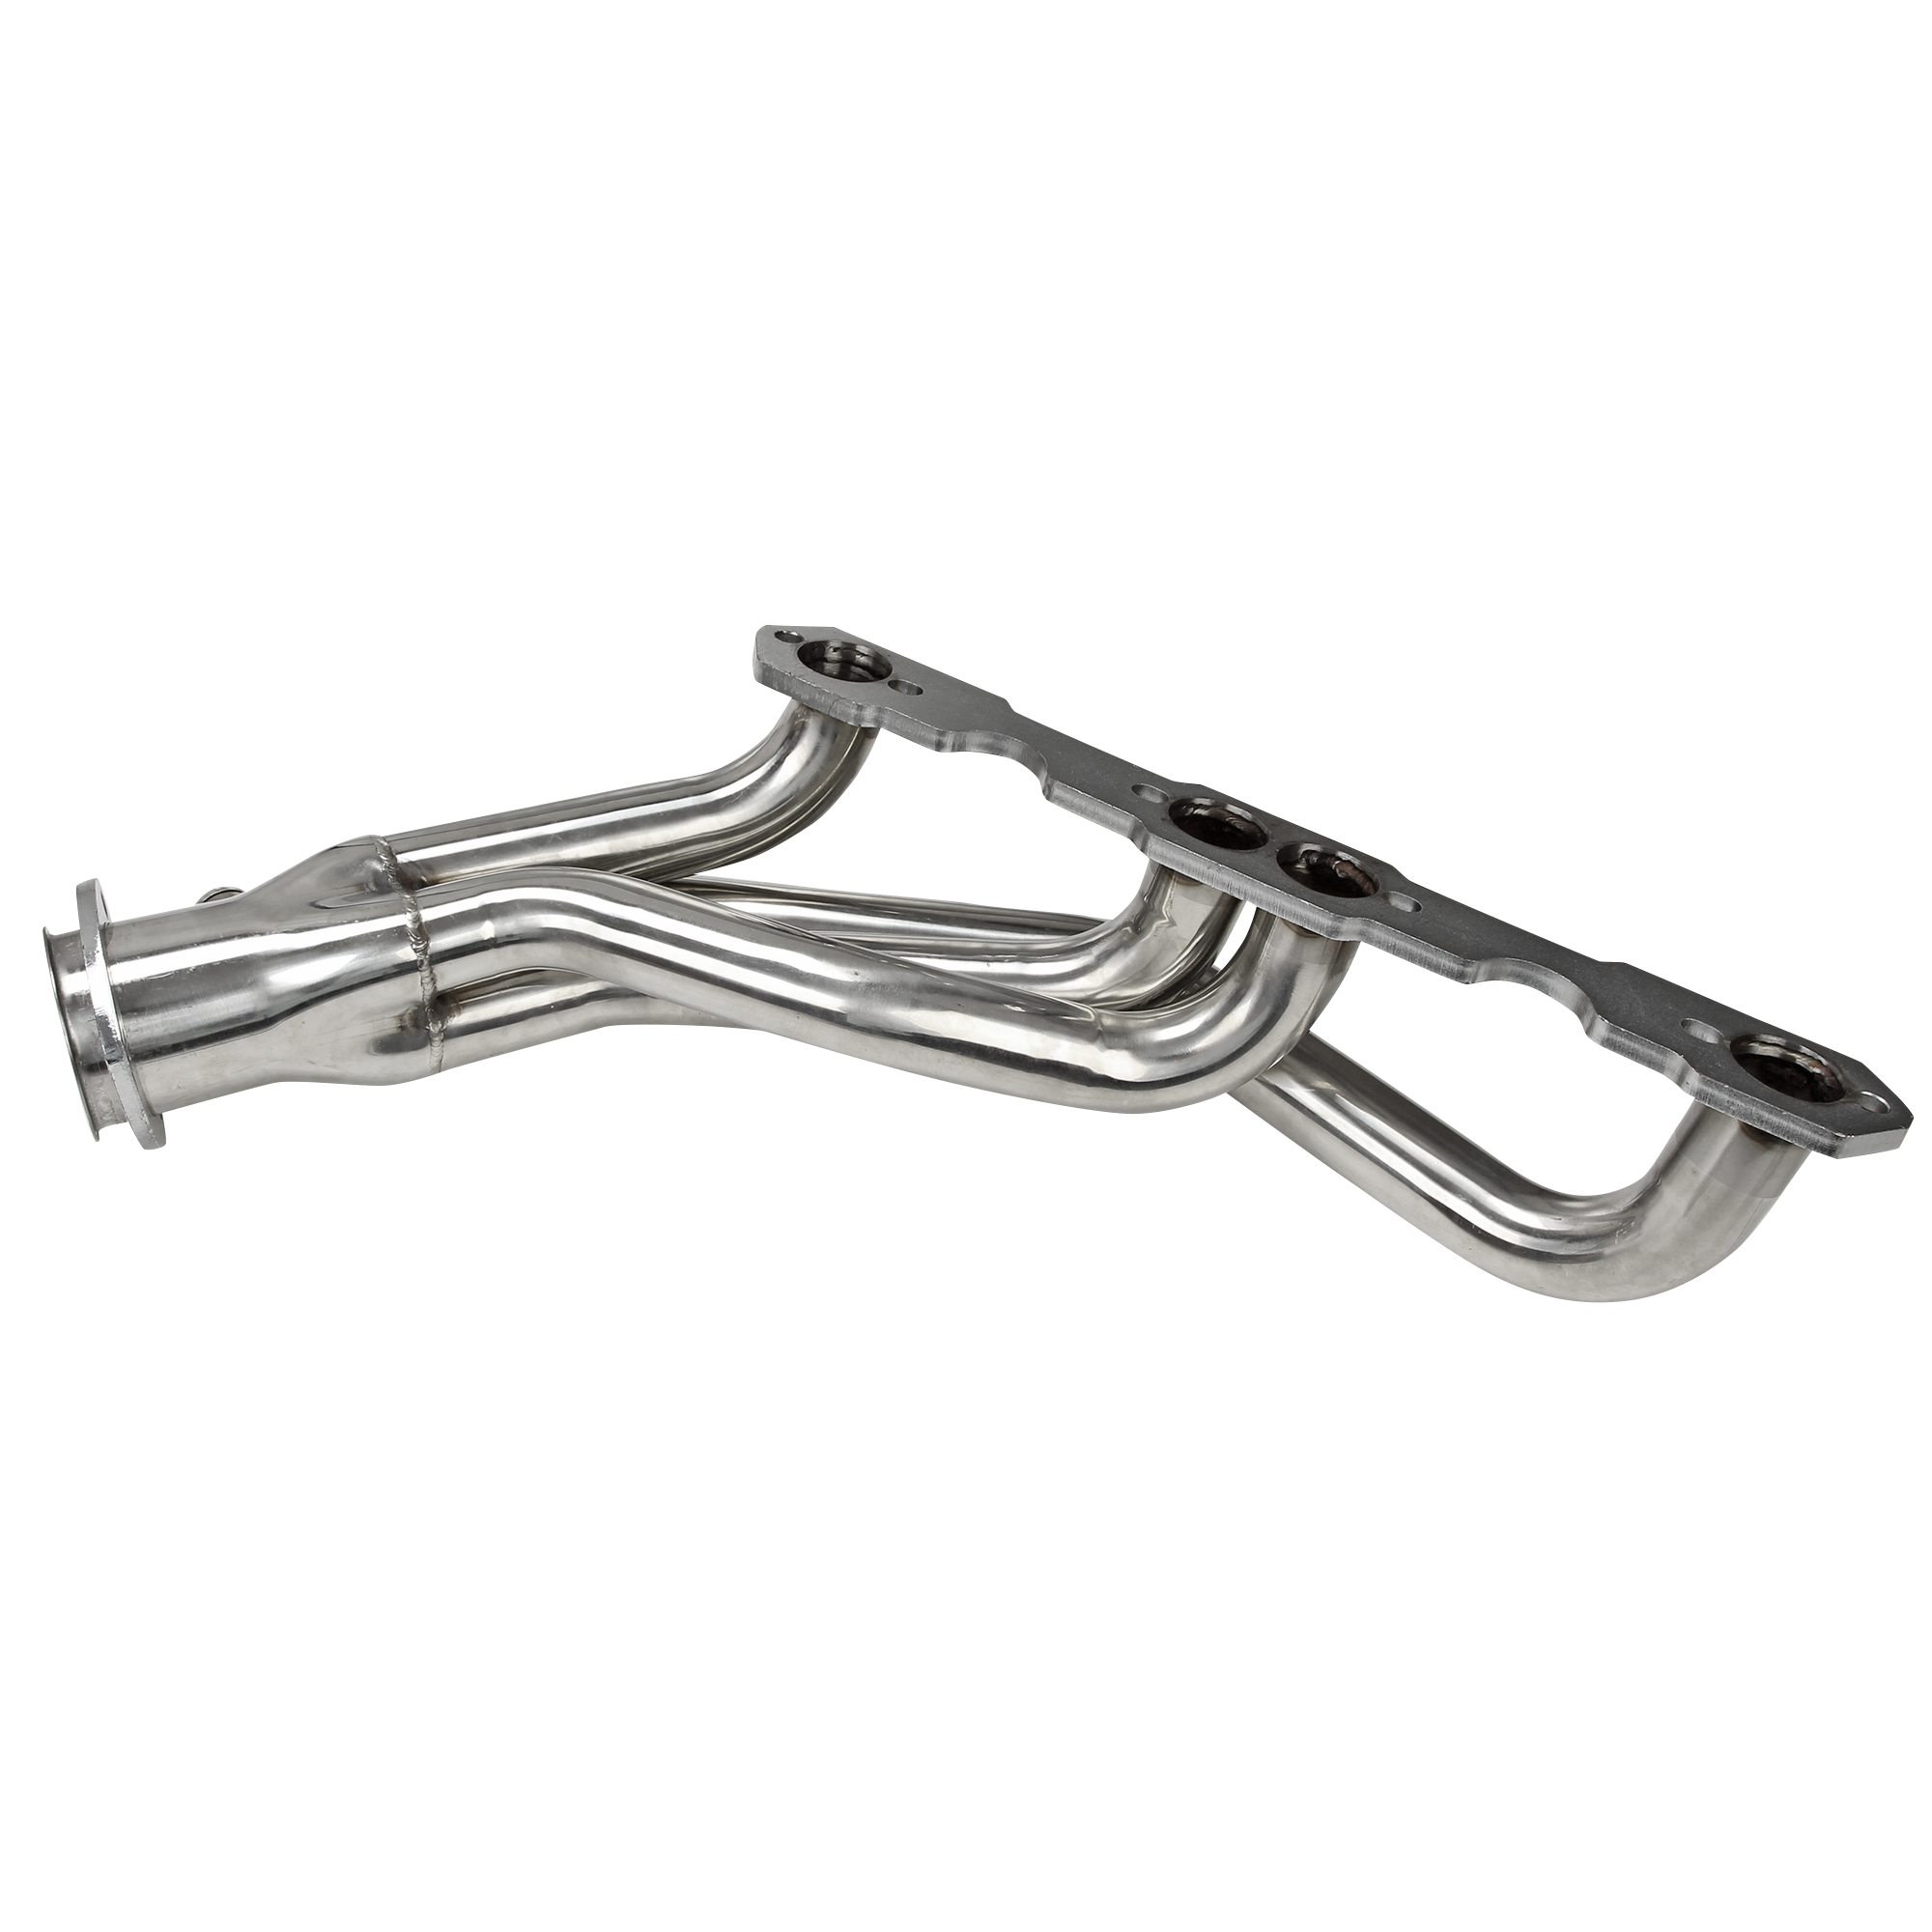 Chevy Exhaust Header for New Chevy 88-95 Truck 305 350 5.7L GMC